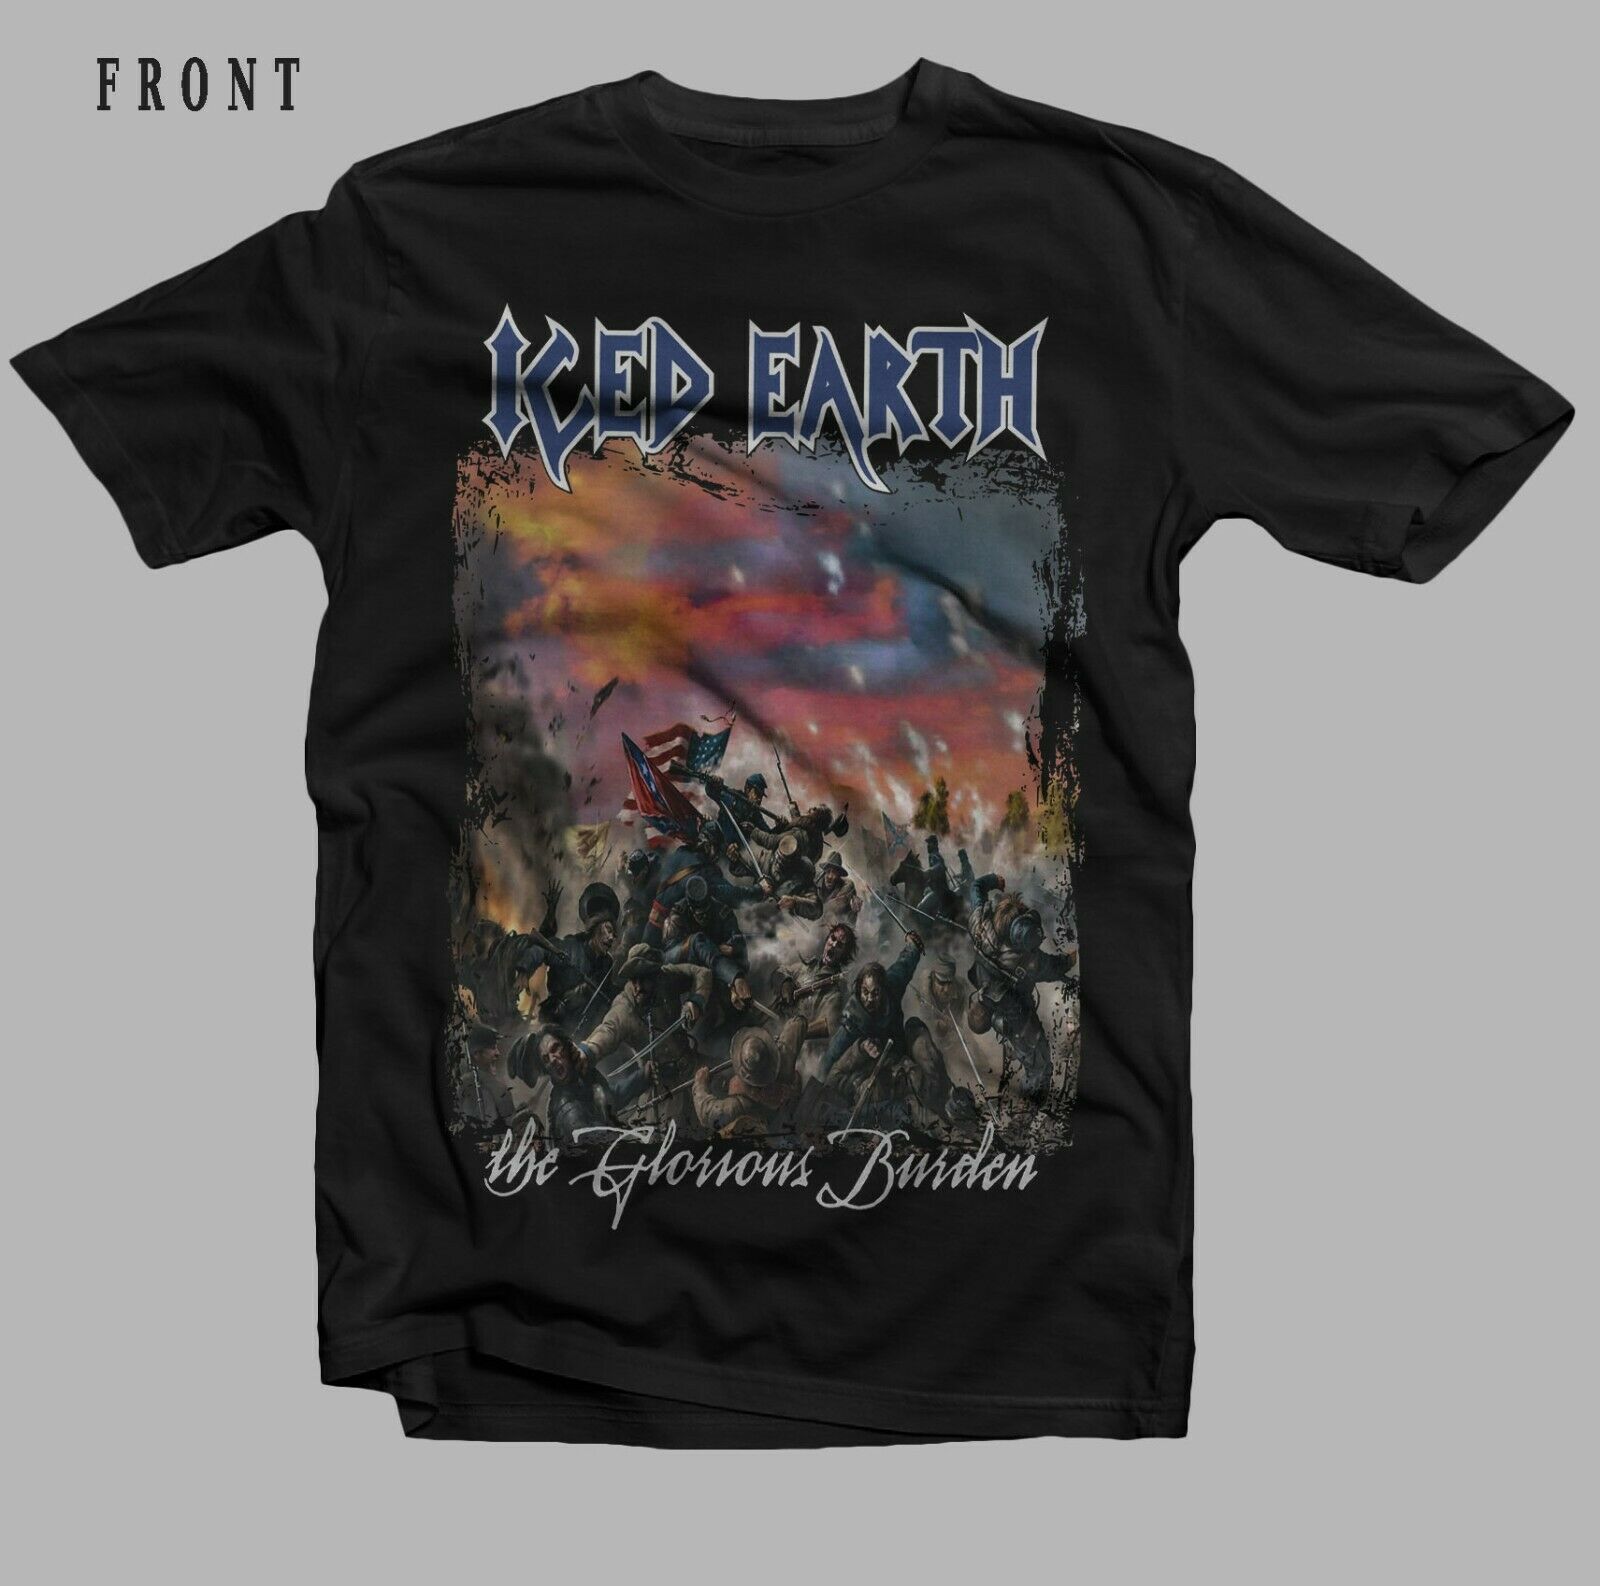 kit skovl sollys ICED EARTH - The Glorious Burden - American Heavy Metal Band T-Shirt -  SquadTee.com